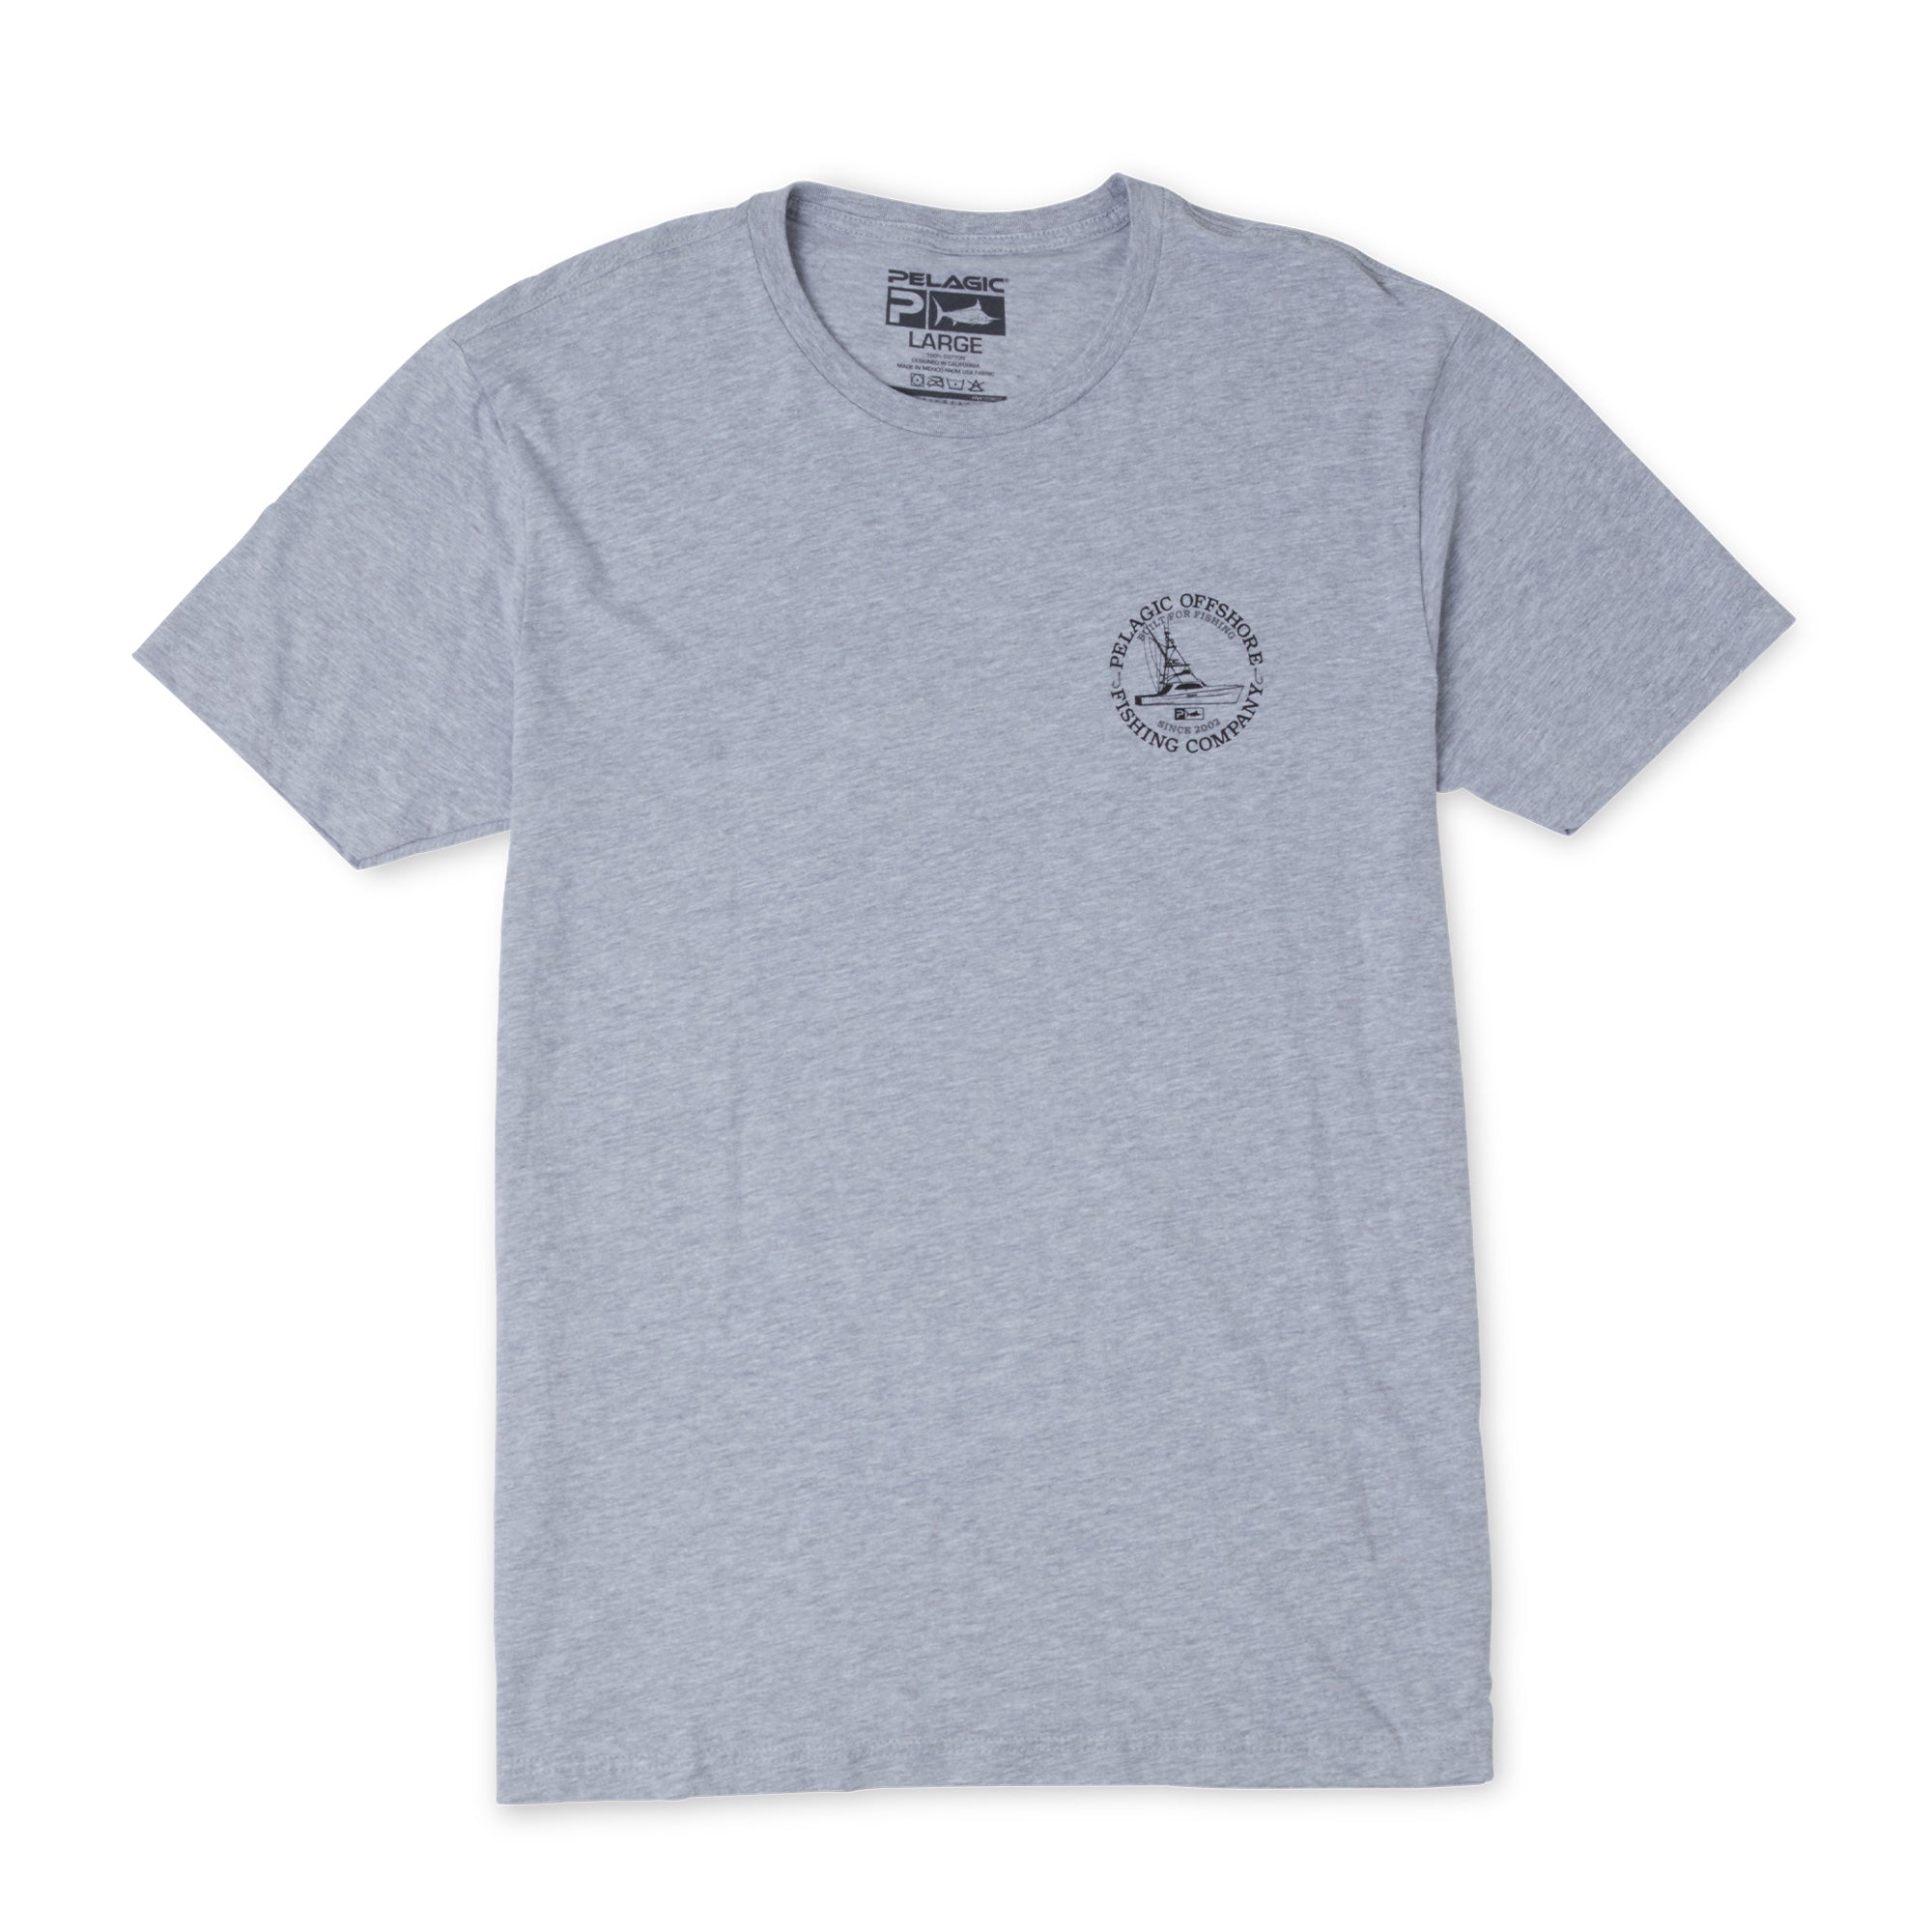 Charter Boat - Heather Grey / S